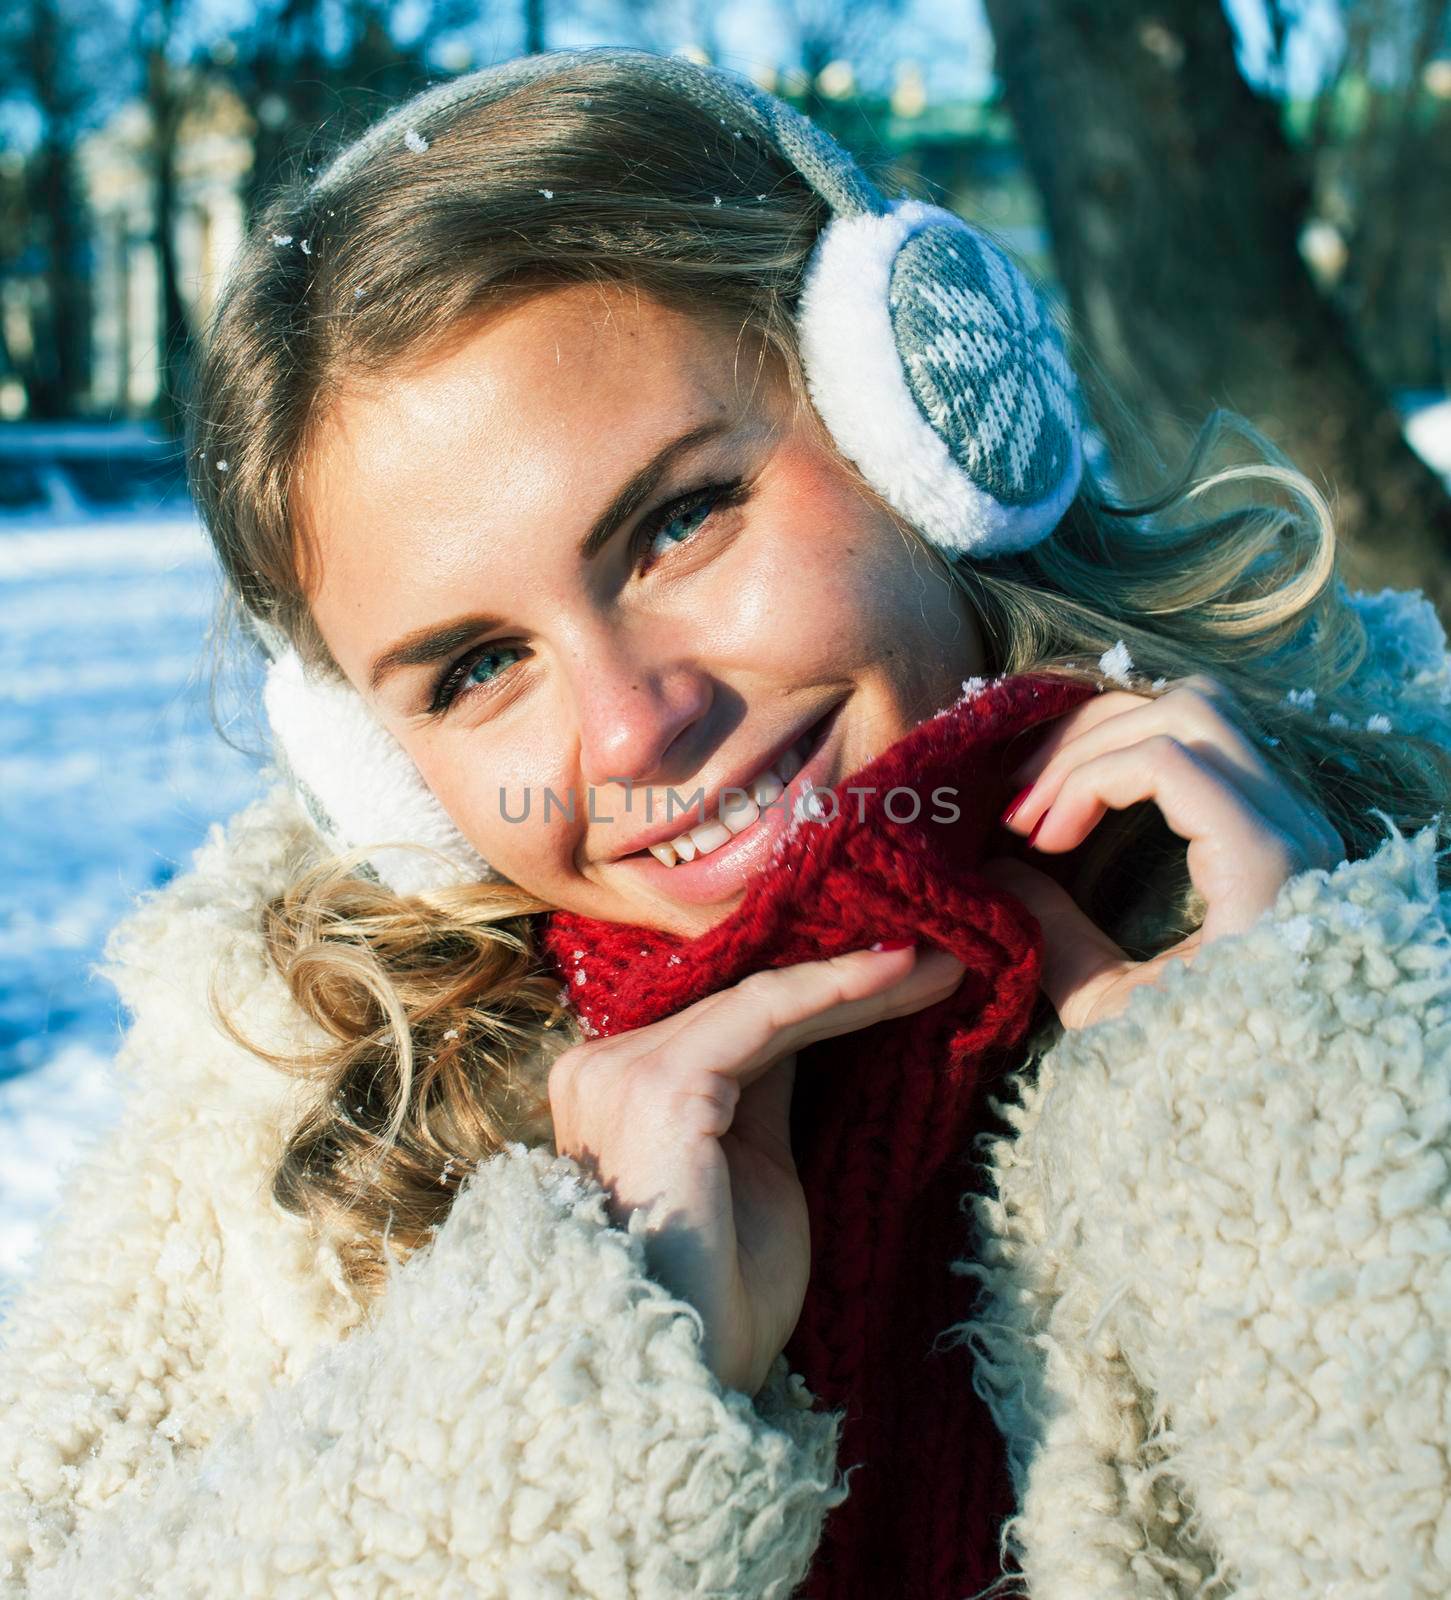 young pretty teenage hipster girl outdoor in winter snow park having fun drinking coffee, warming up happy smiling, lifestyle people concept by JordanJ